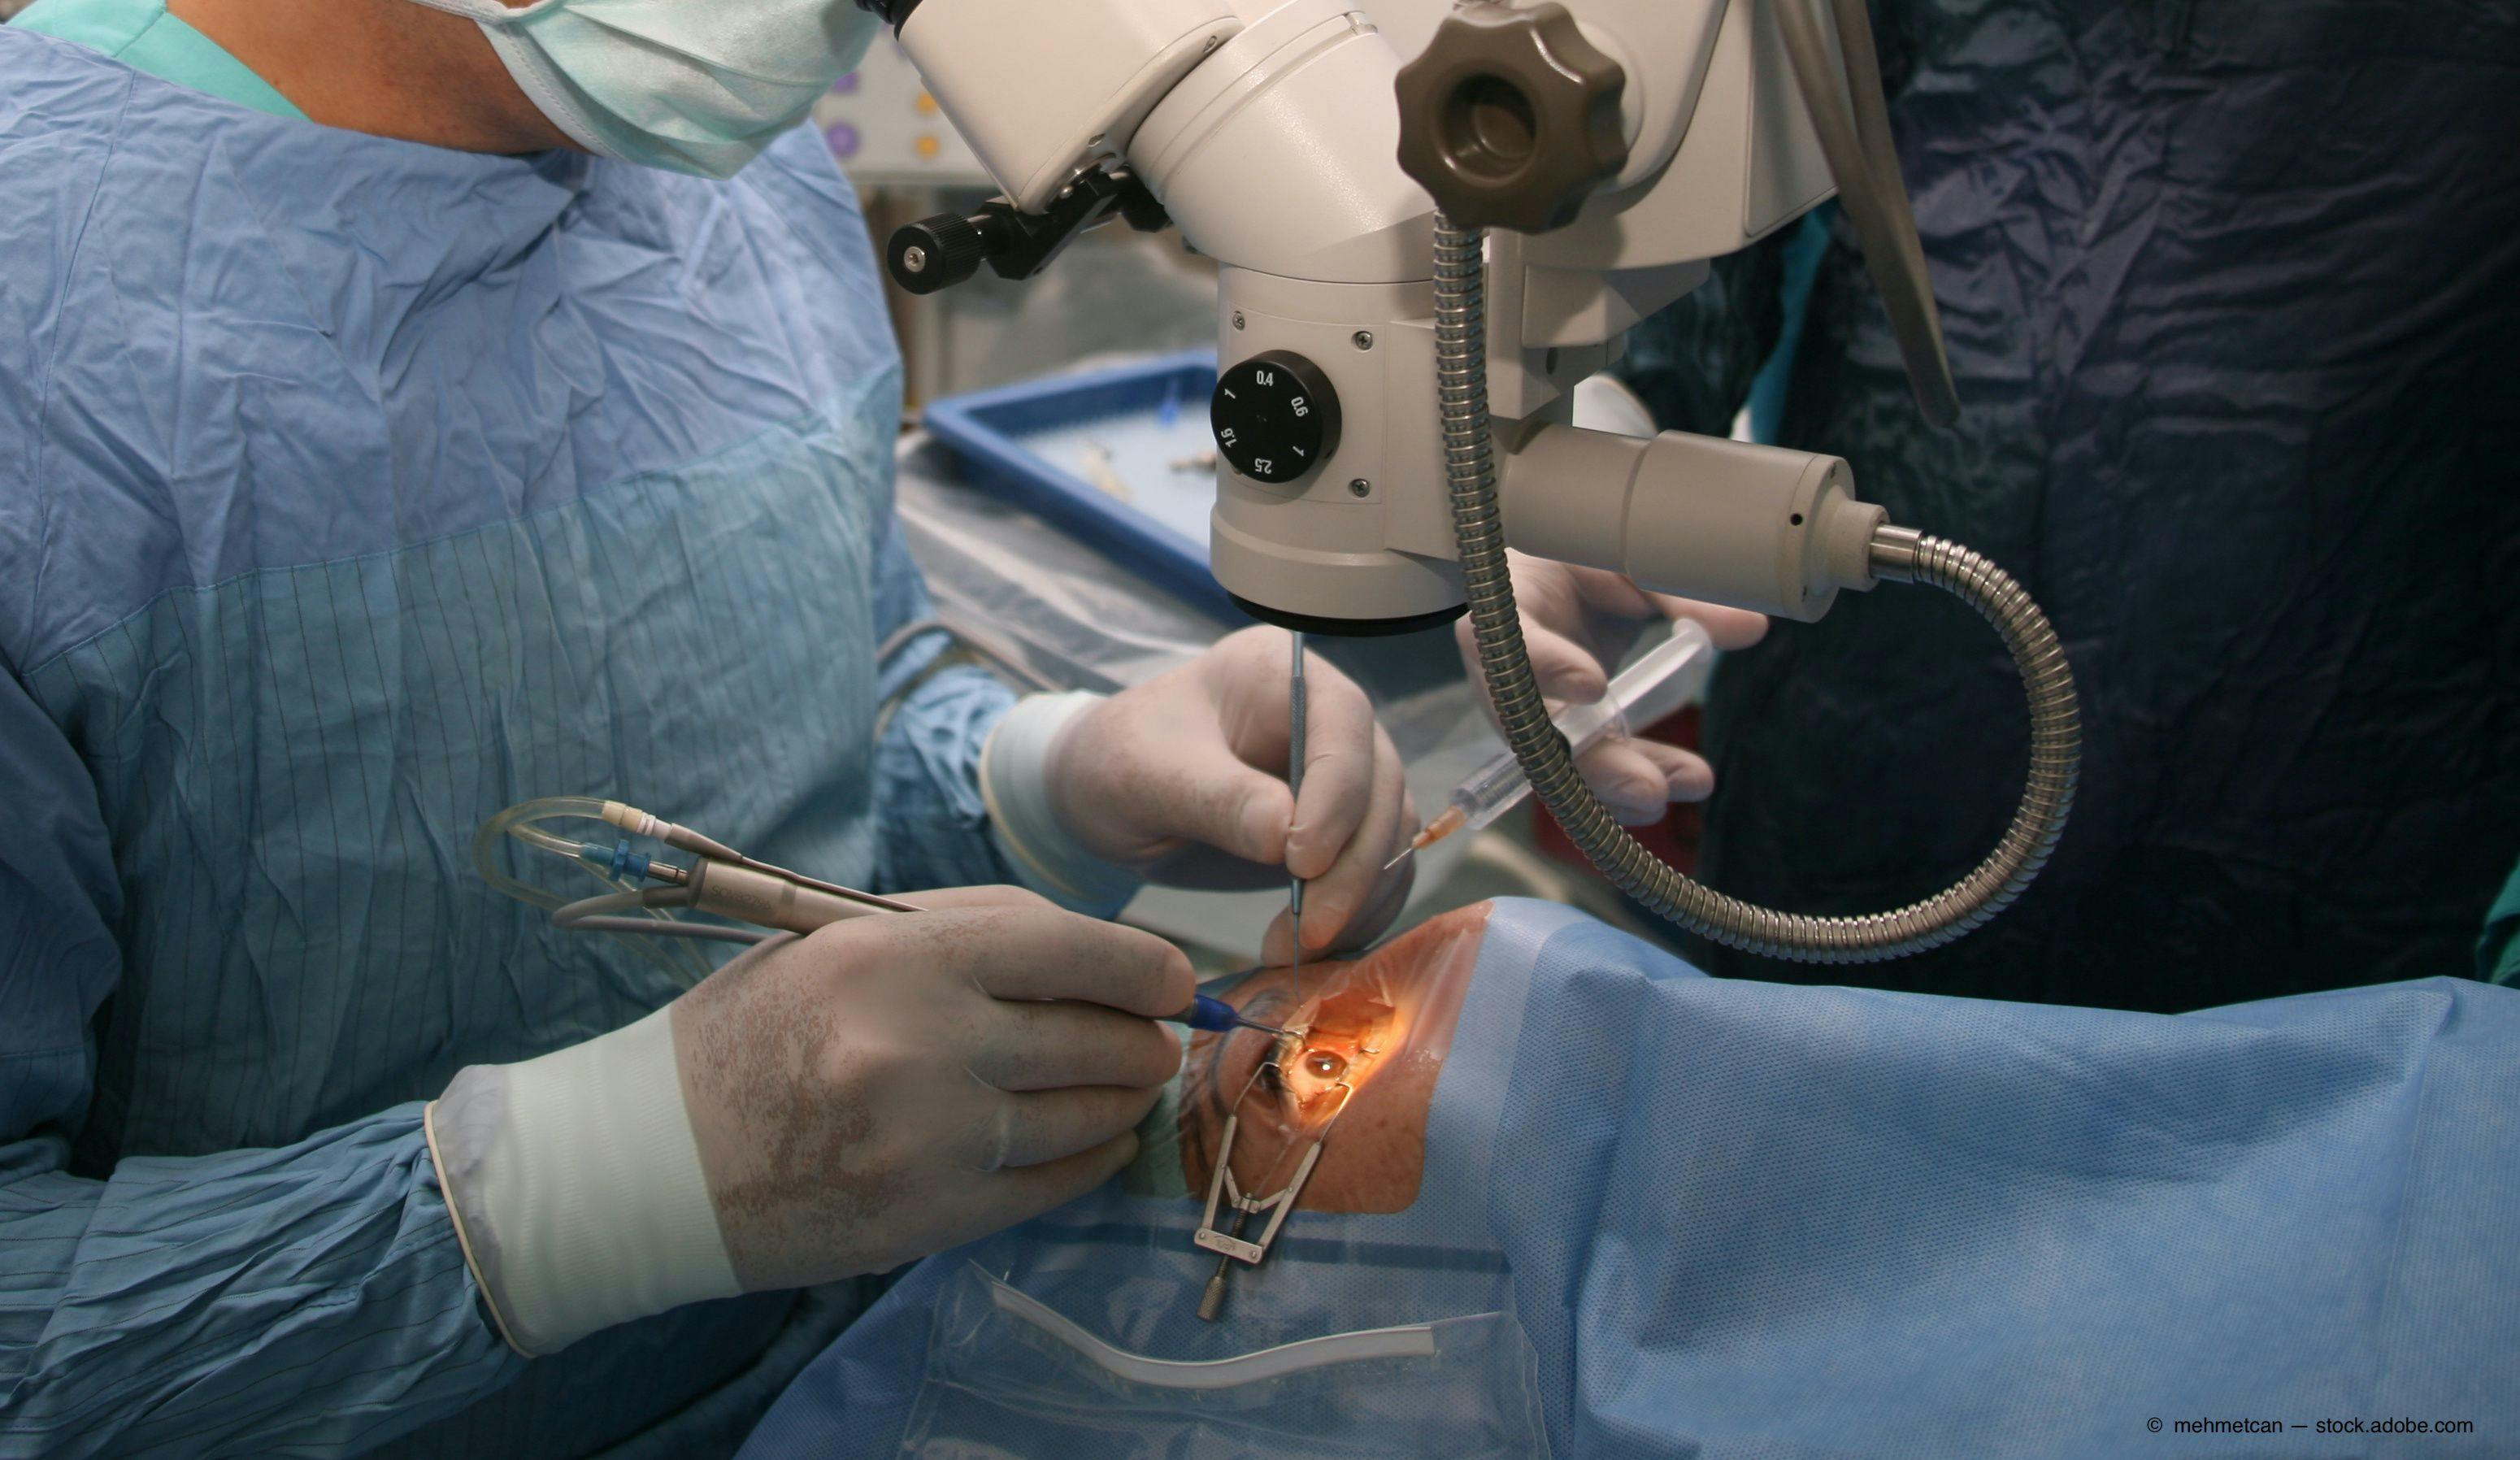 Yoshihiro Yonekawa, MD, reports on the findings of an investigation looking at the prevalence of endophthalmitis following minimally invasive glaucoma surgery. 